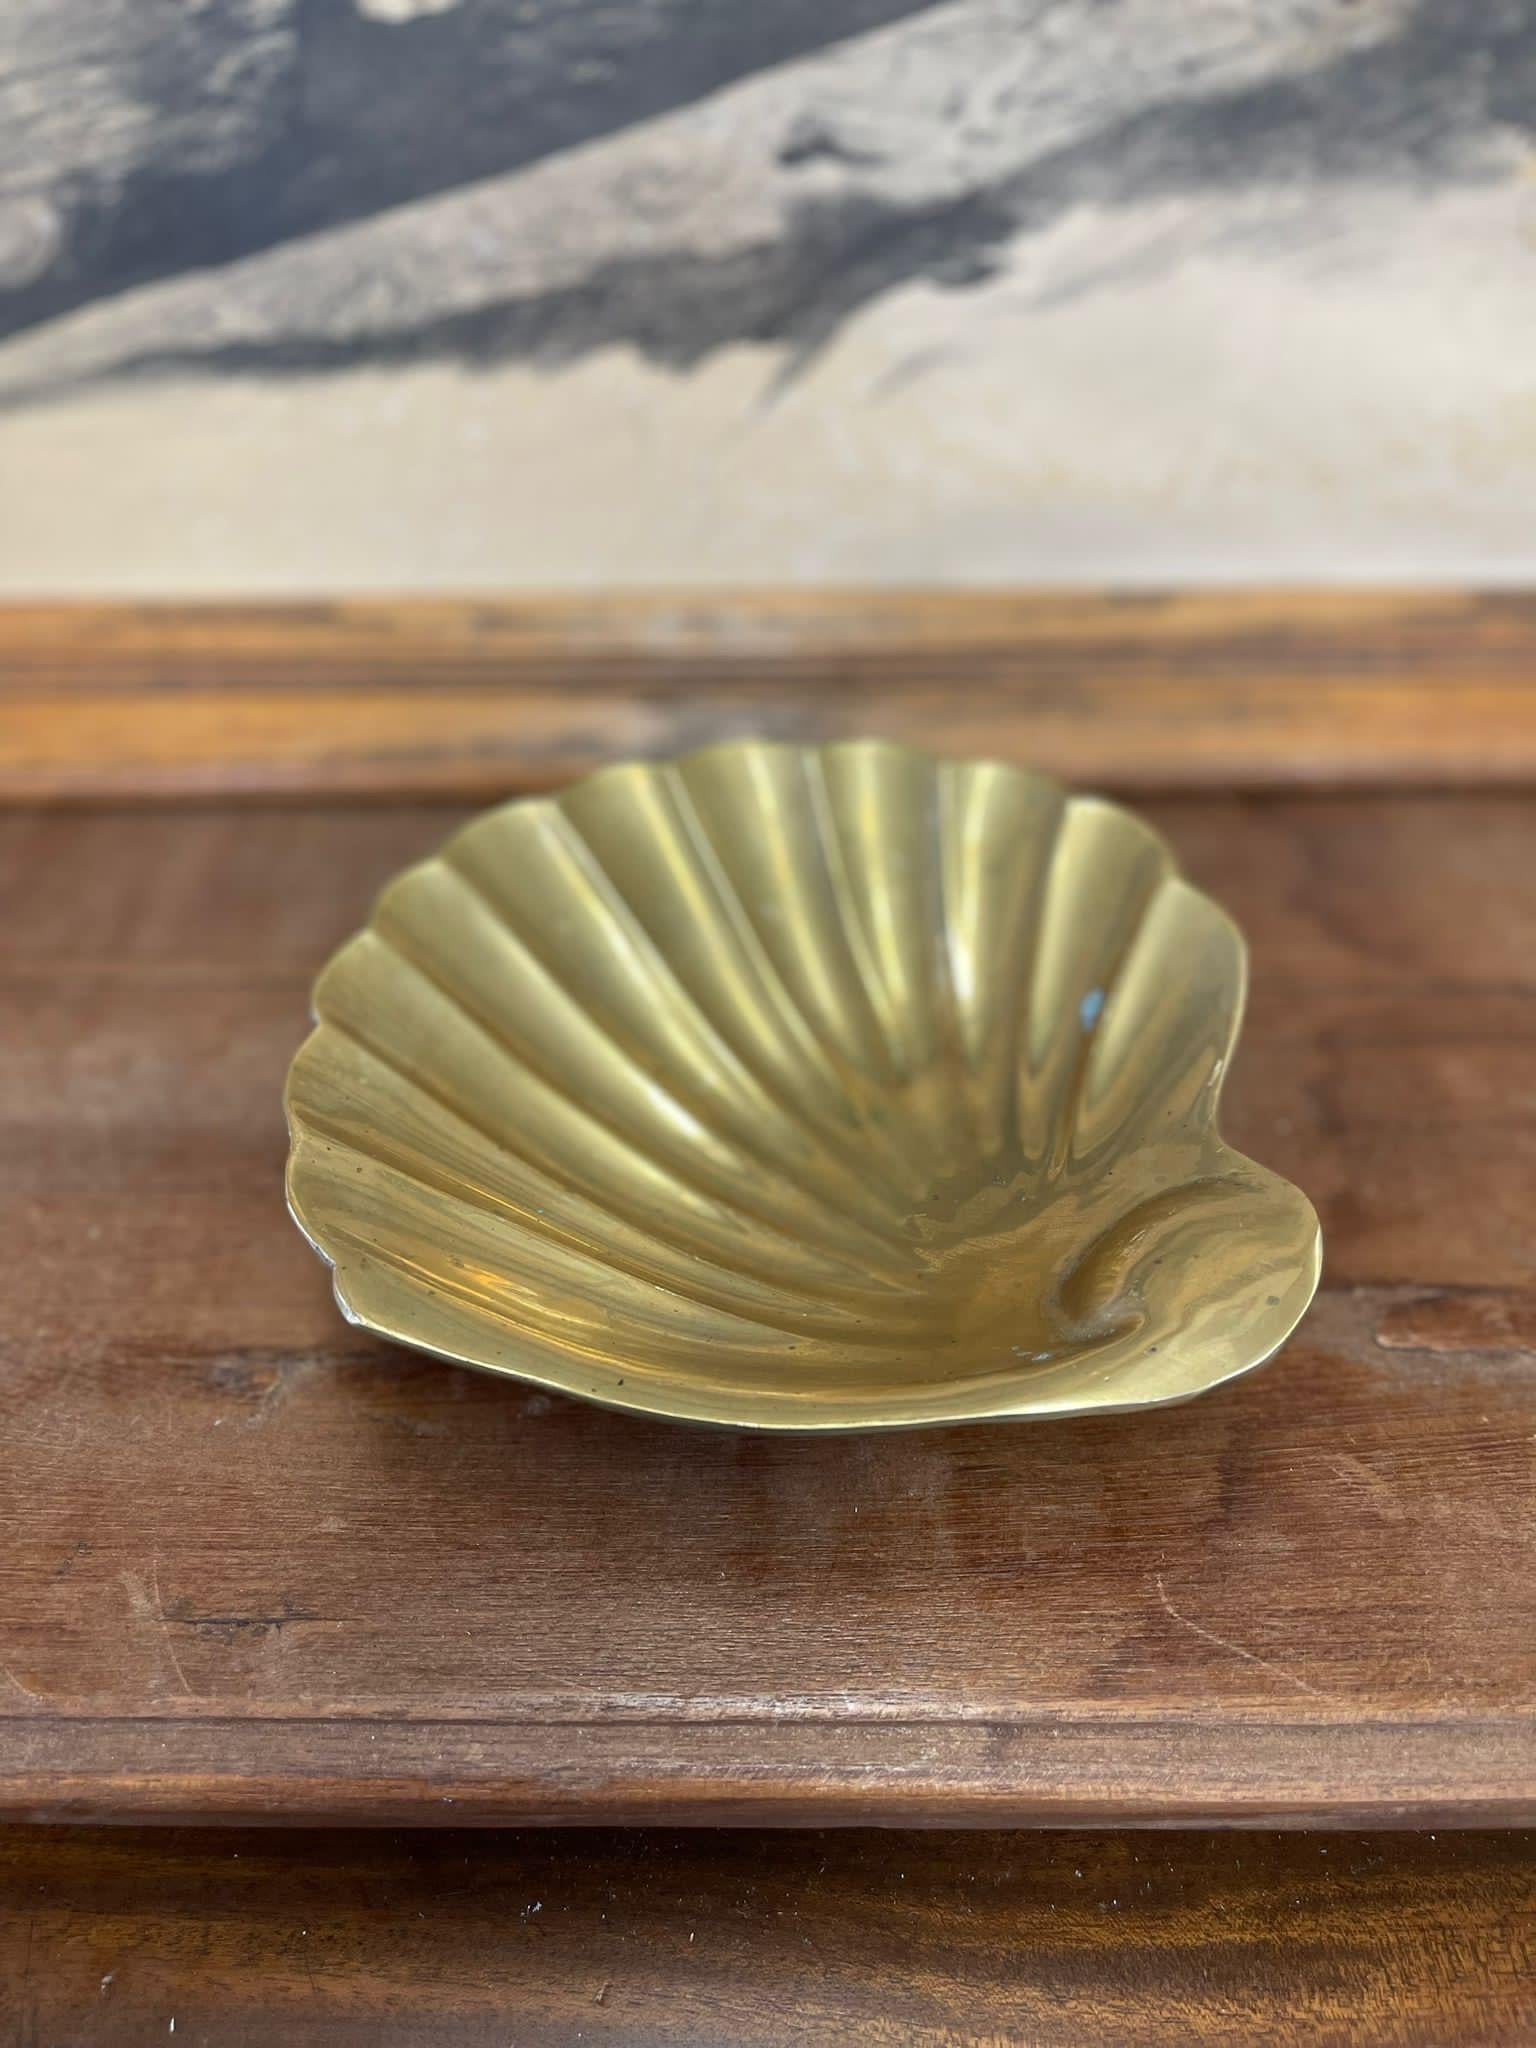 Brass Toned Catch-All Tray. Slight Petina on the Top and bottom . Vintage Condition Consistent with Age as Pictured.

Dimensions. 8 W ; 7 D ; 2 H